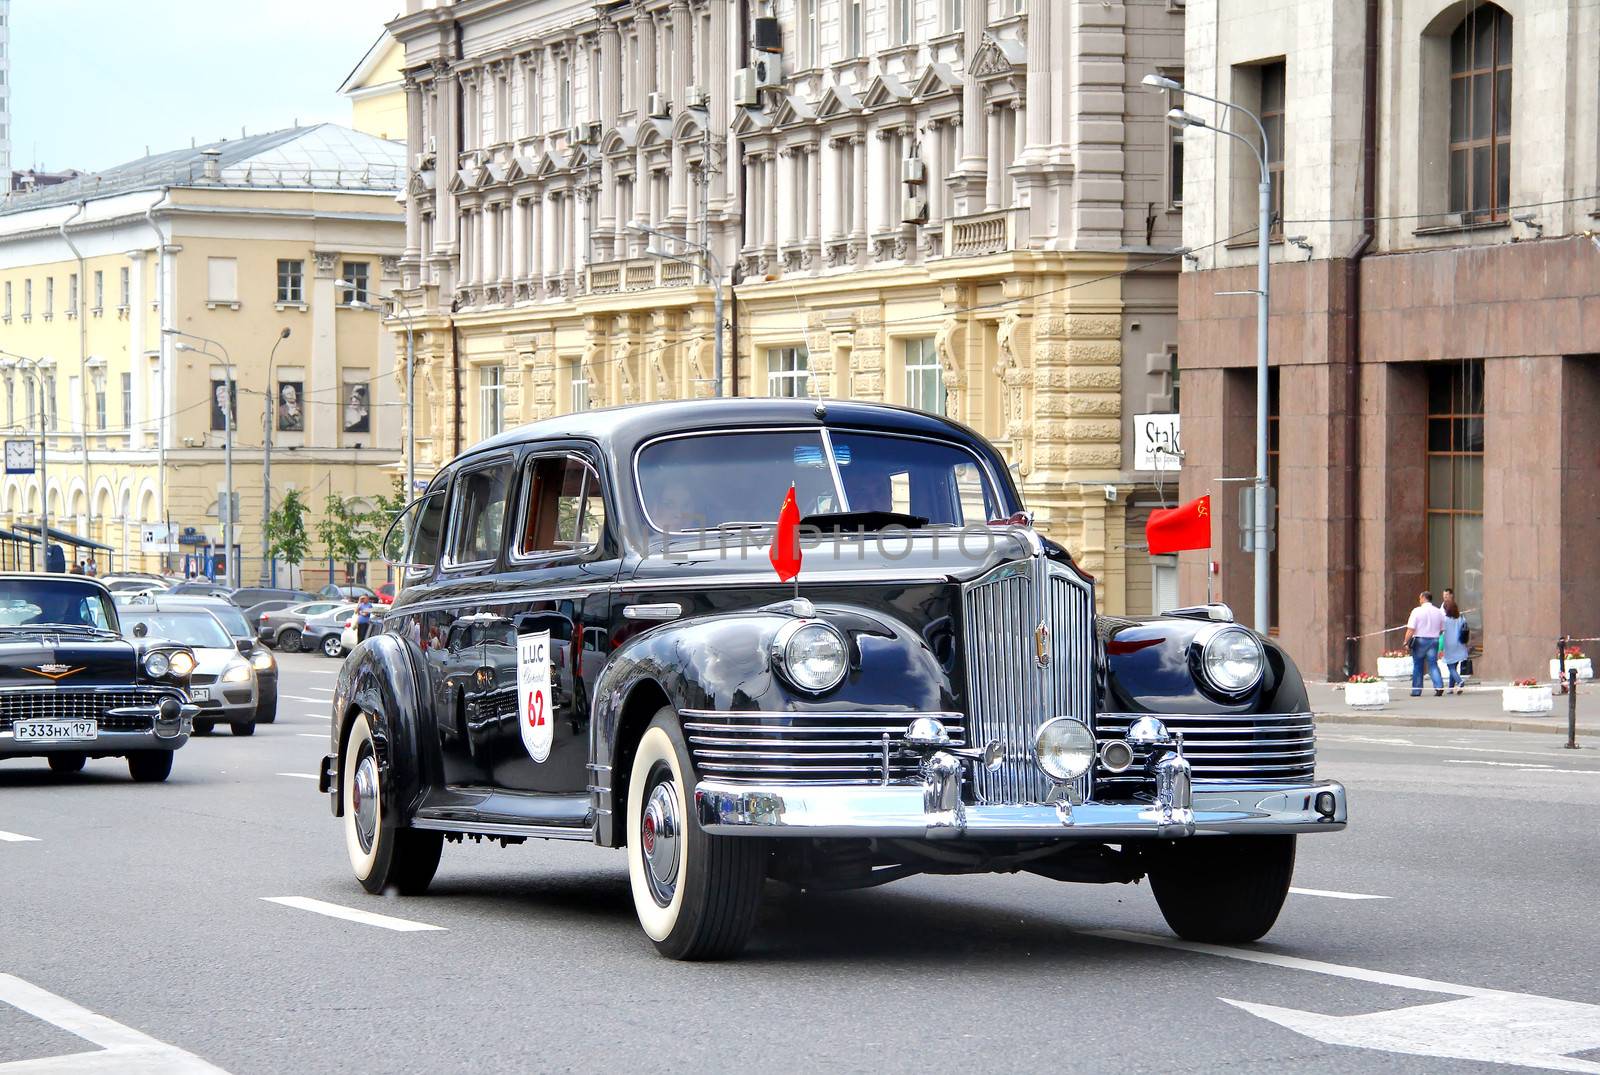 MOSCOW, RUSSIA - JUNE 2: Soviet vehicle ZiS-110 competes at the annual L.U.C. Chopard Classic Weekend Rally on June 2, 2013 in Moscow, Russia.